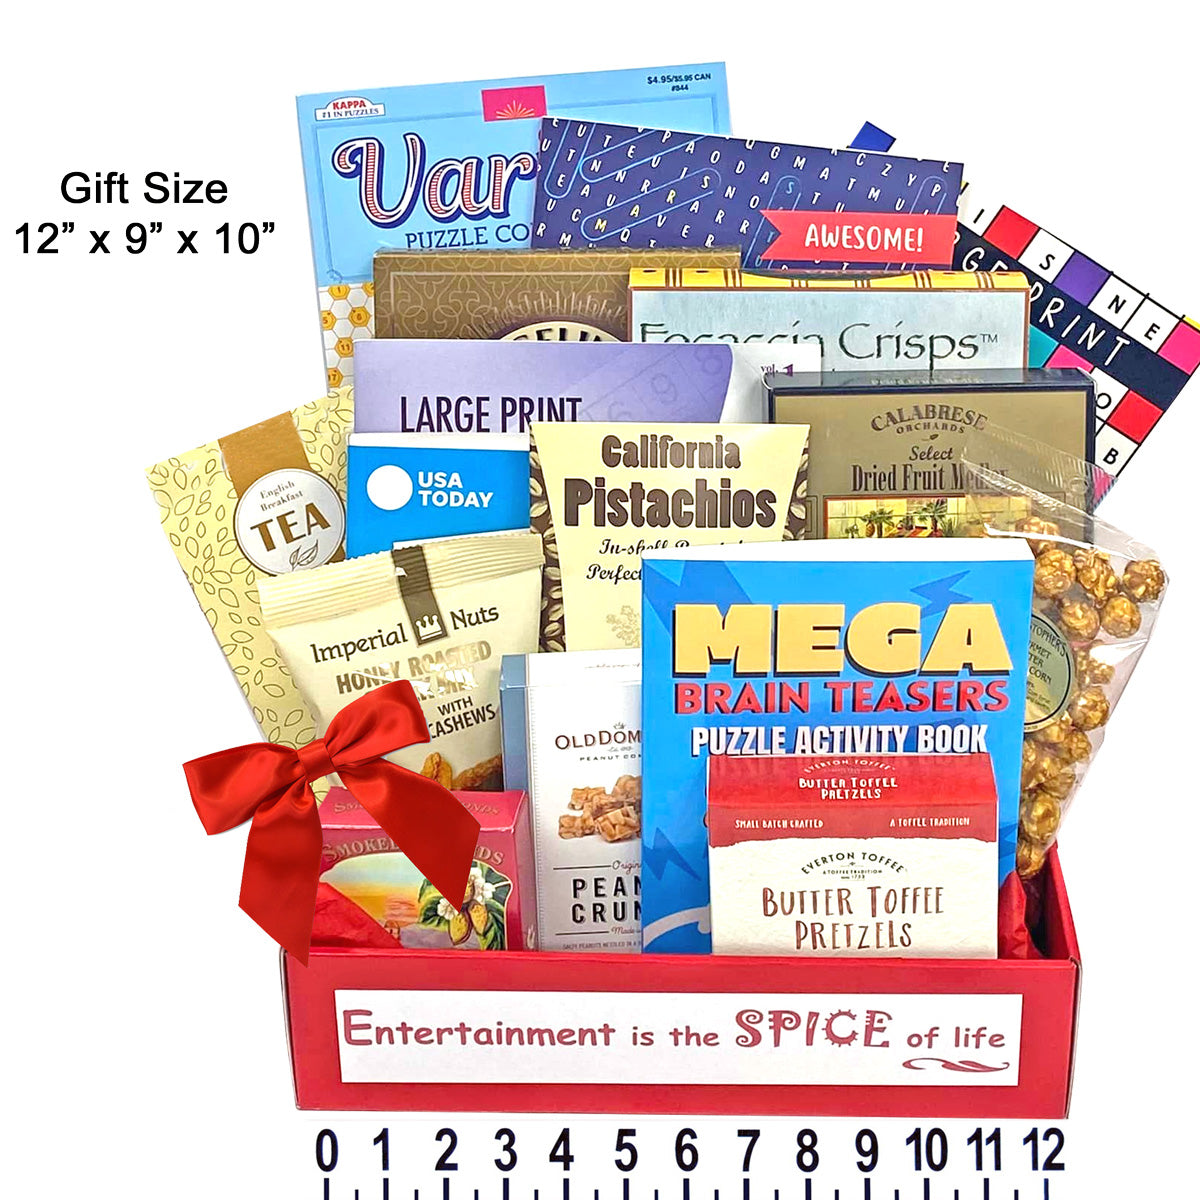 Puzzle Books and Snacks Entertainment Gift Basket for Men